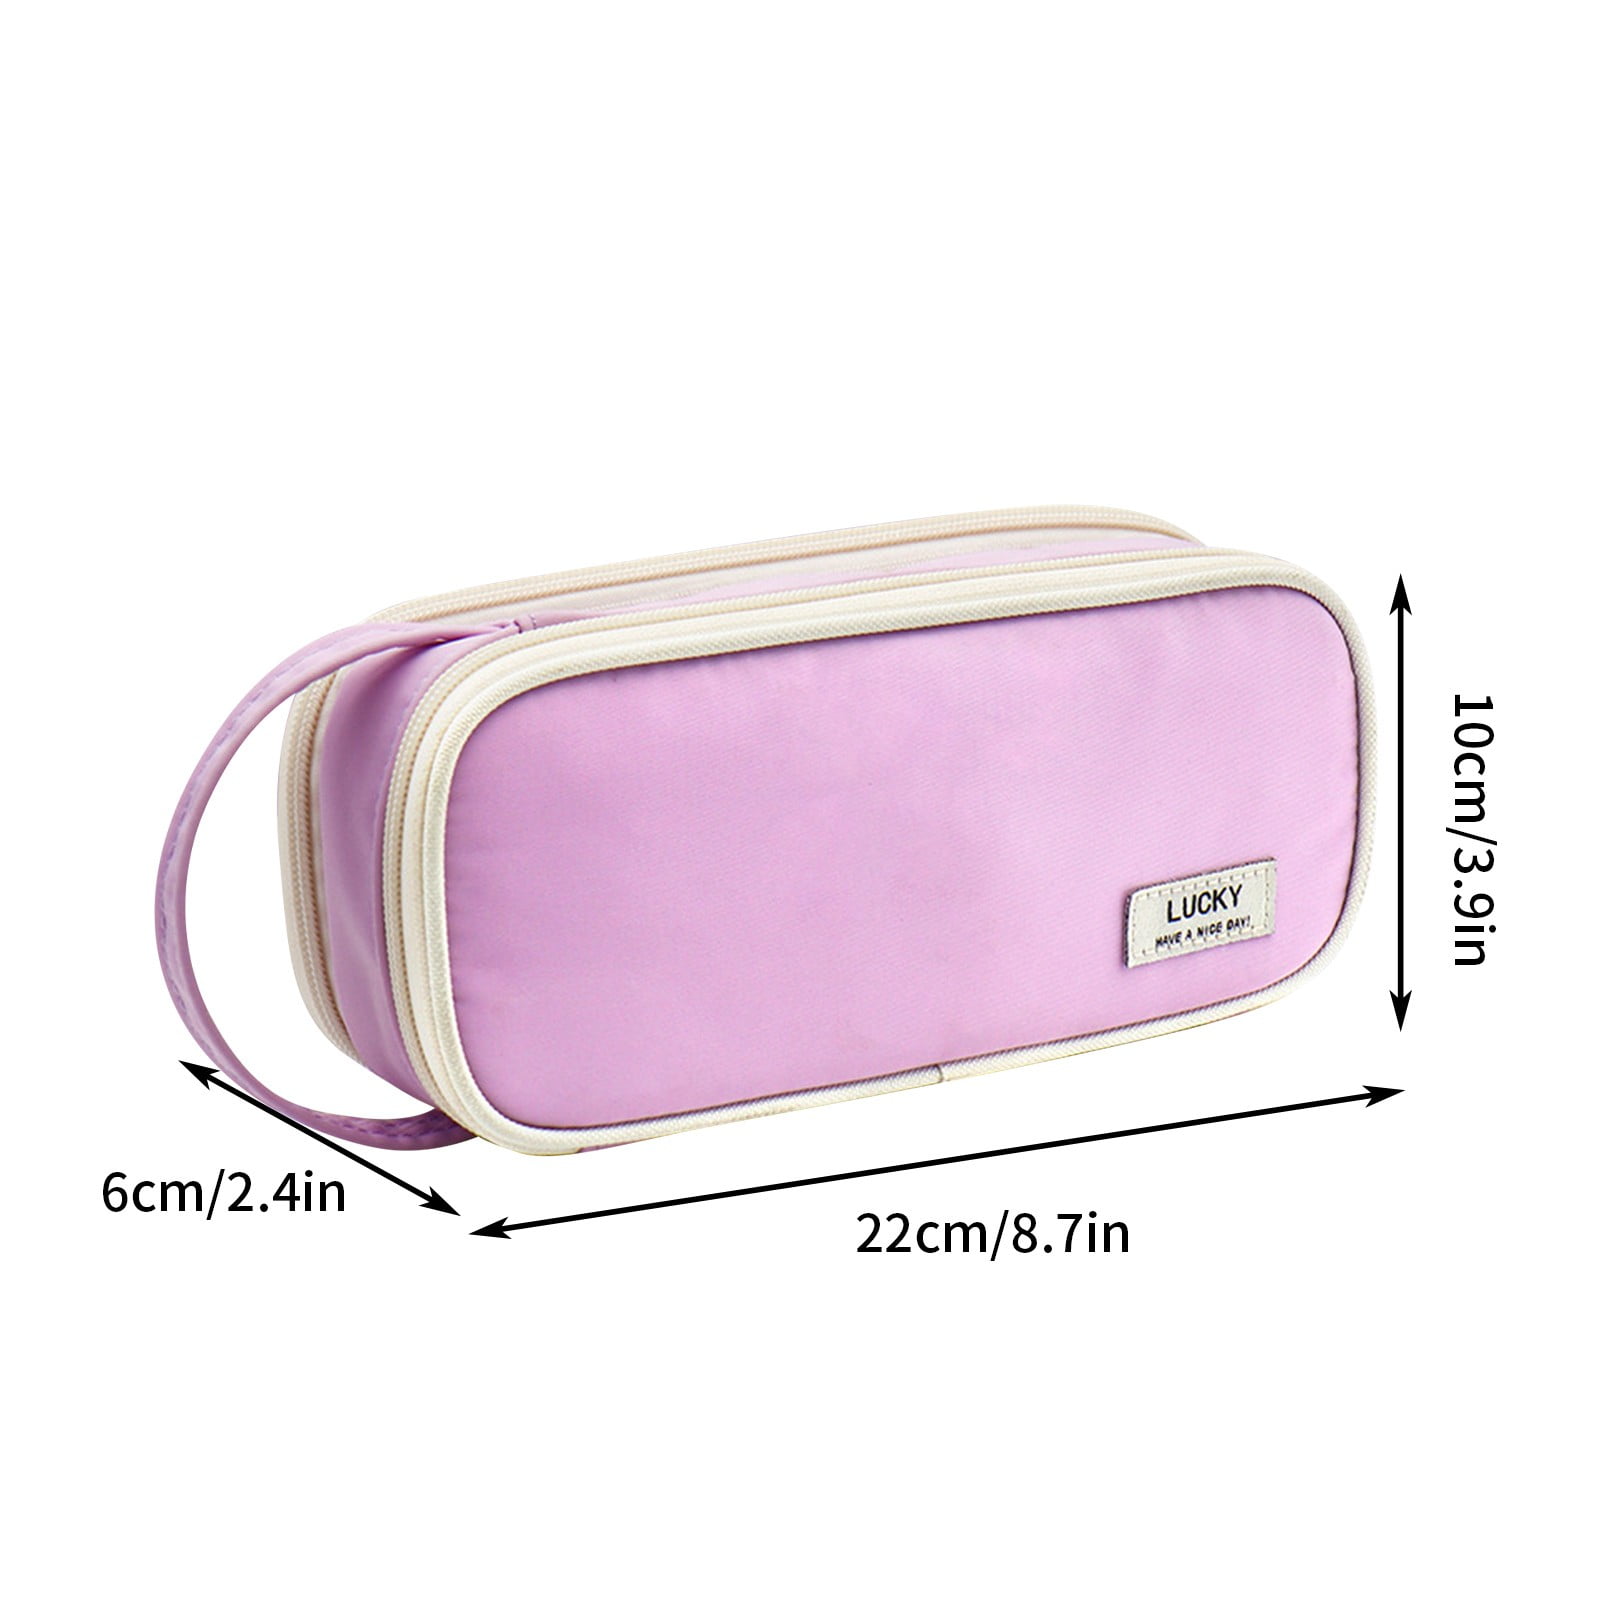 BKFYDLS School Supplies Clearance Pencil Case Pencil Pouch Pencil Pouch 3  Ring, Zipper Pencil Pouches Case Binder Cosmetic Bag Back To School  Supplies 